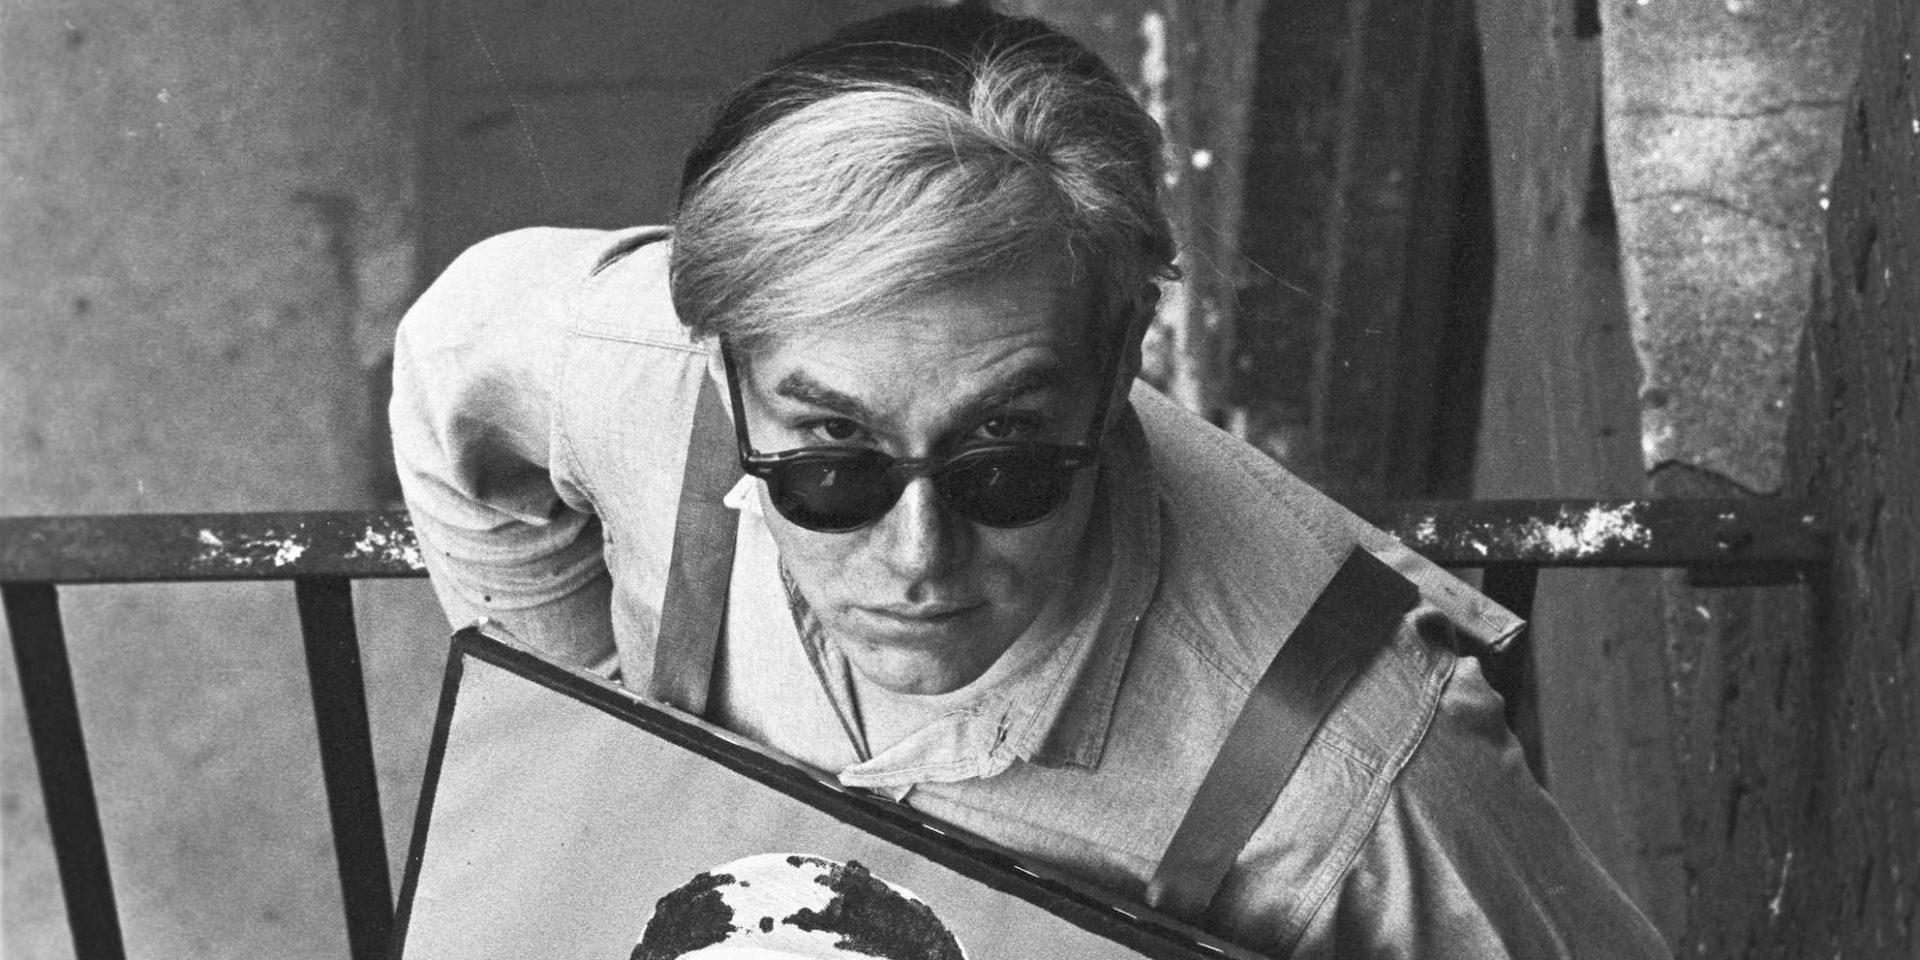 Facts about Andy Warhol